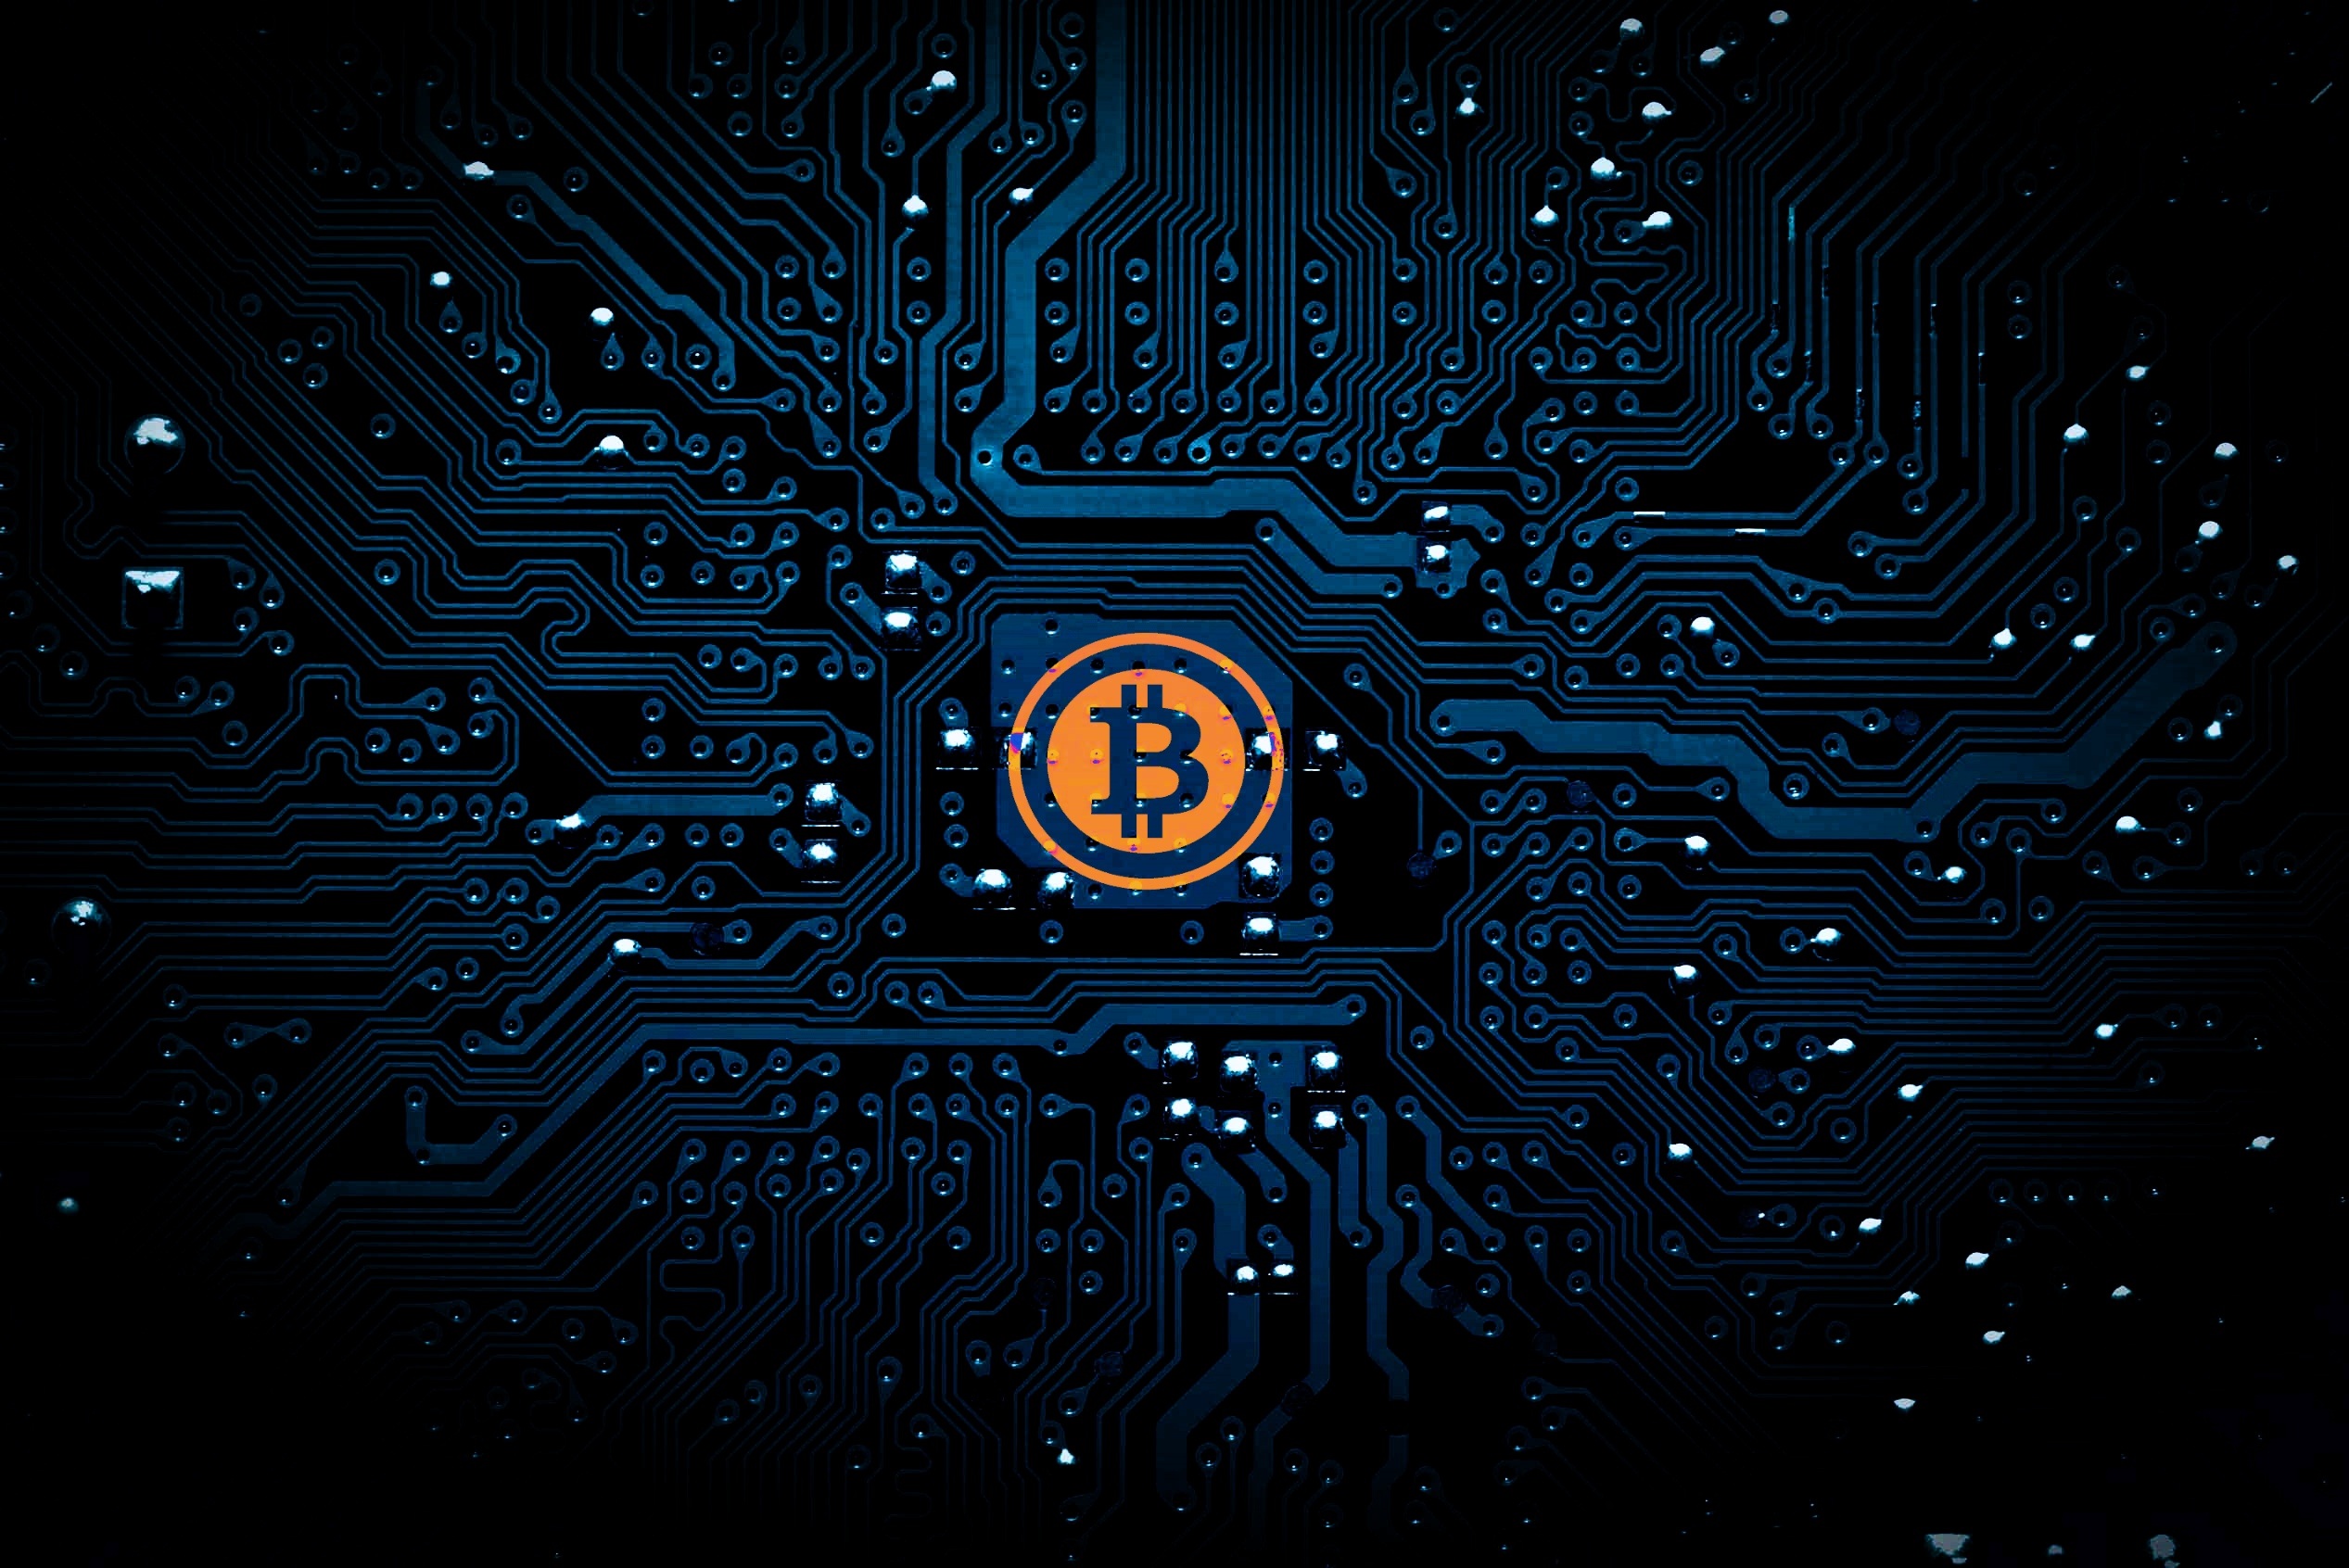 what mathematical problems does bitcoin solve